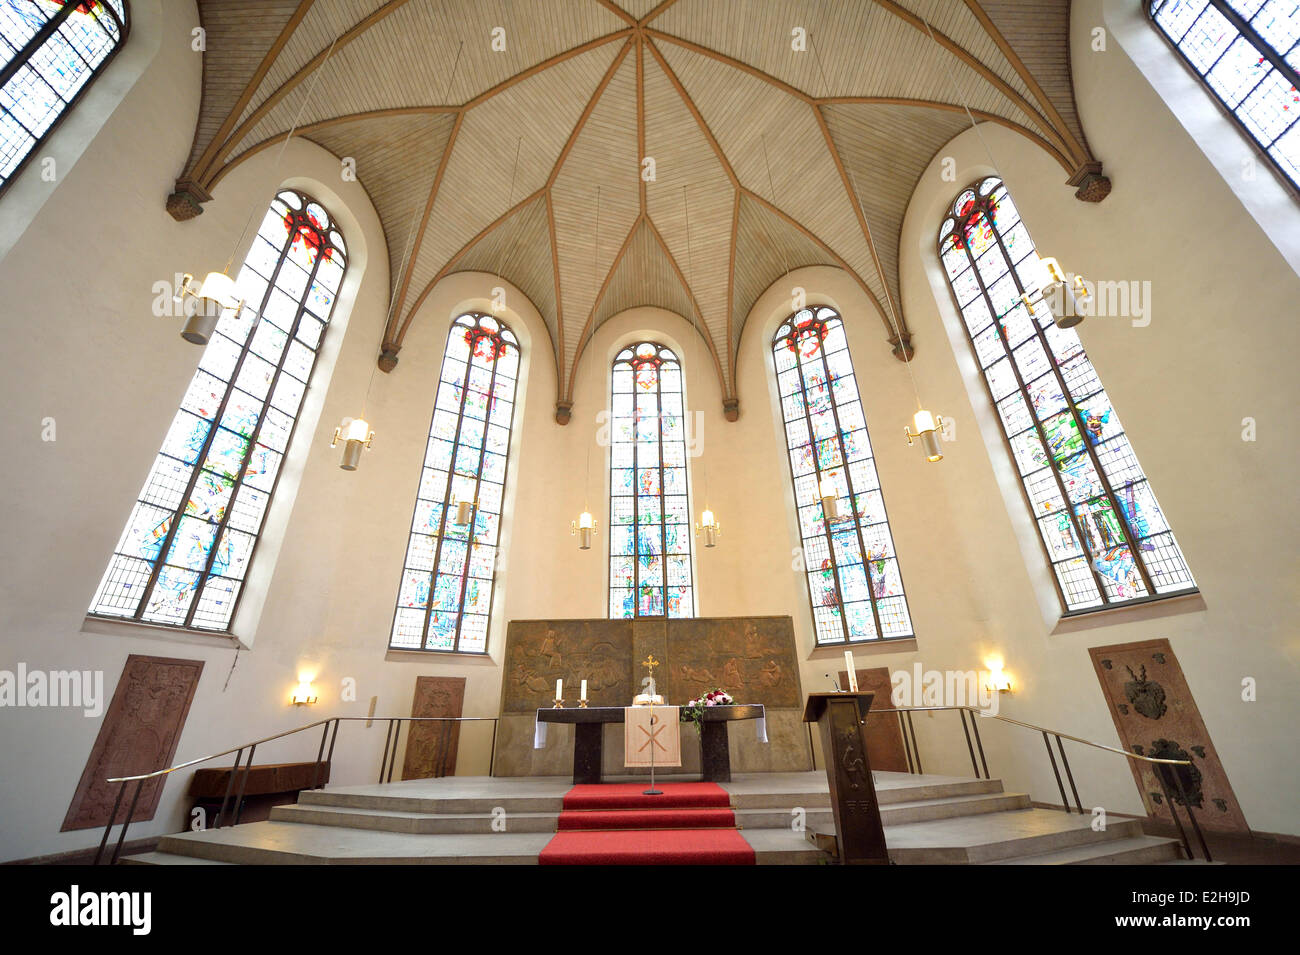 Altar and choir, St. Catherine's Church, the largest Lutheran church in Frankfurt am Main, Hesse, Germany Stock Photo